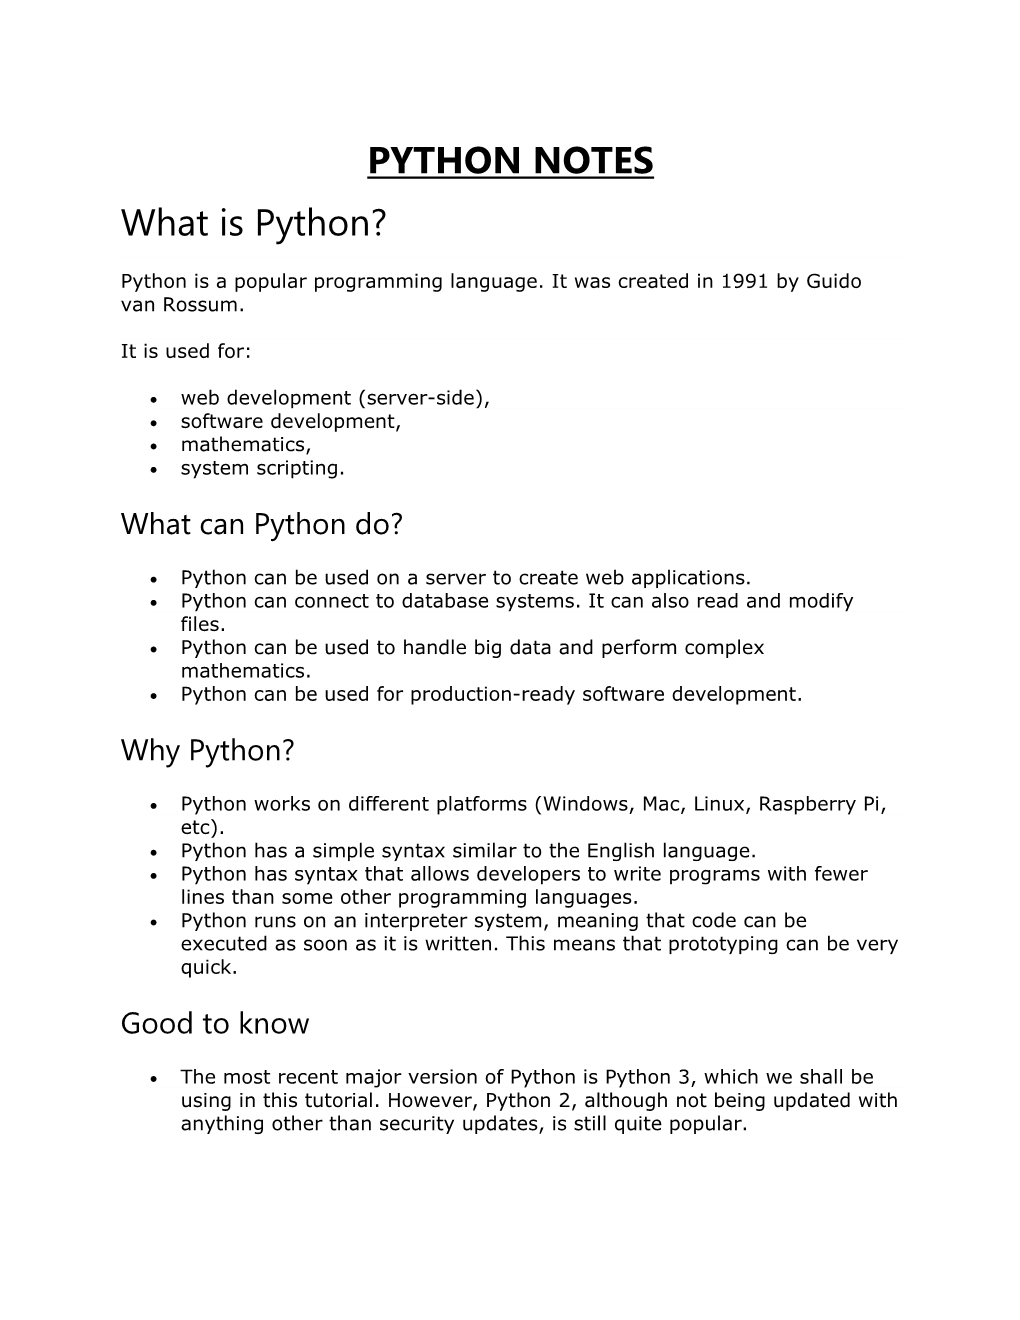 PYTHON NOTES What Is Python?